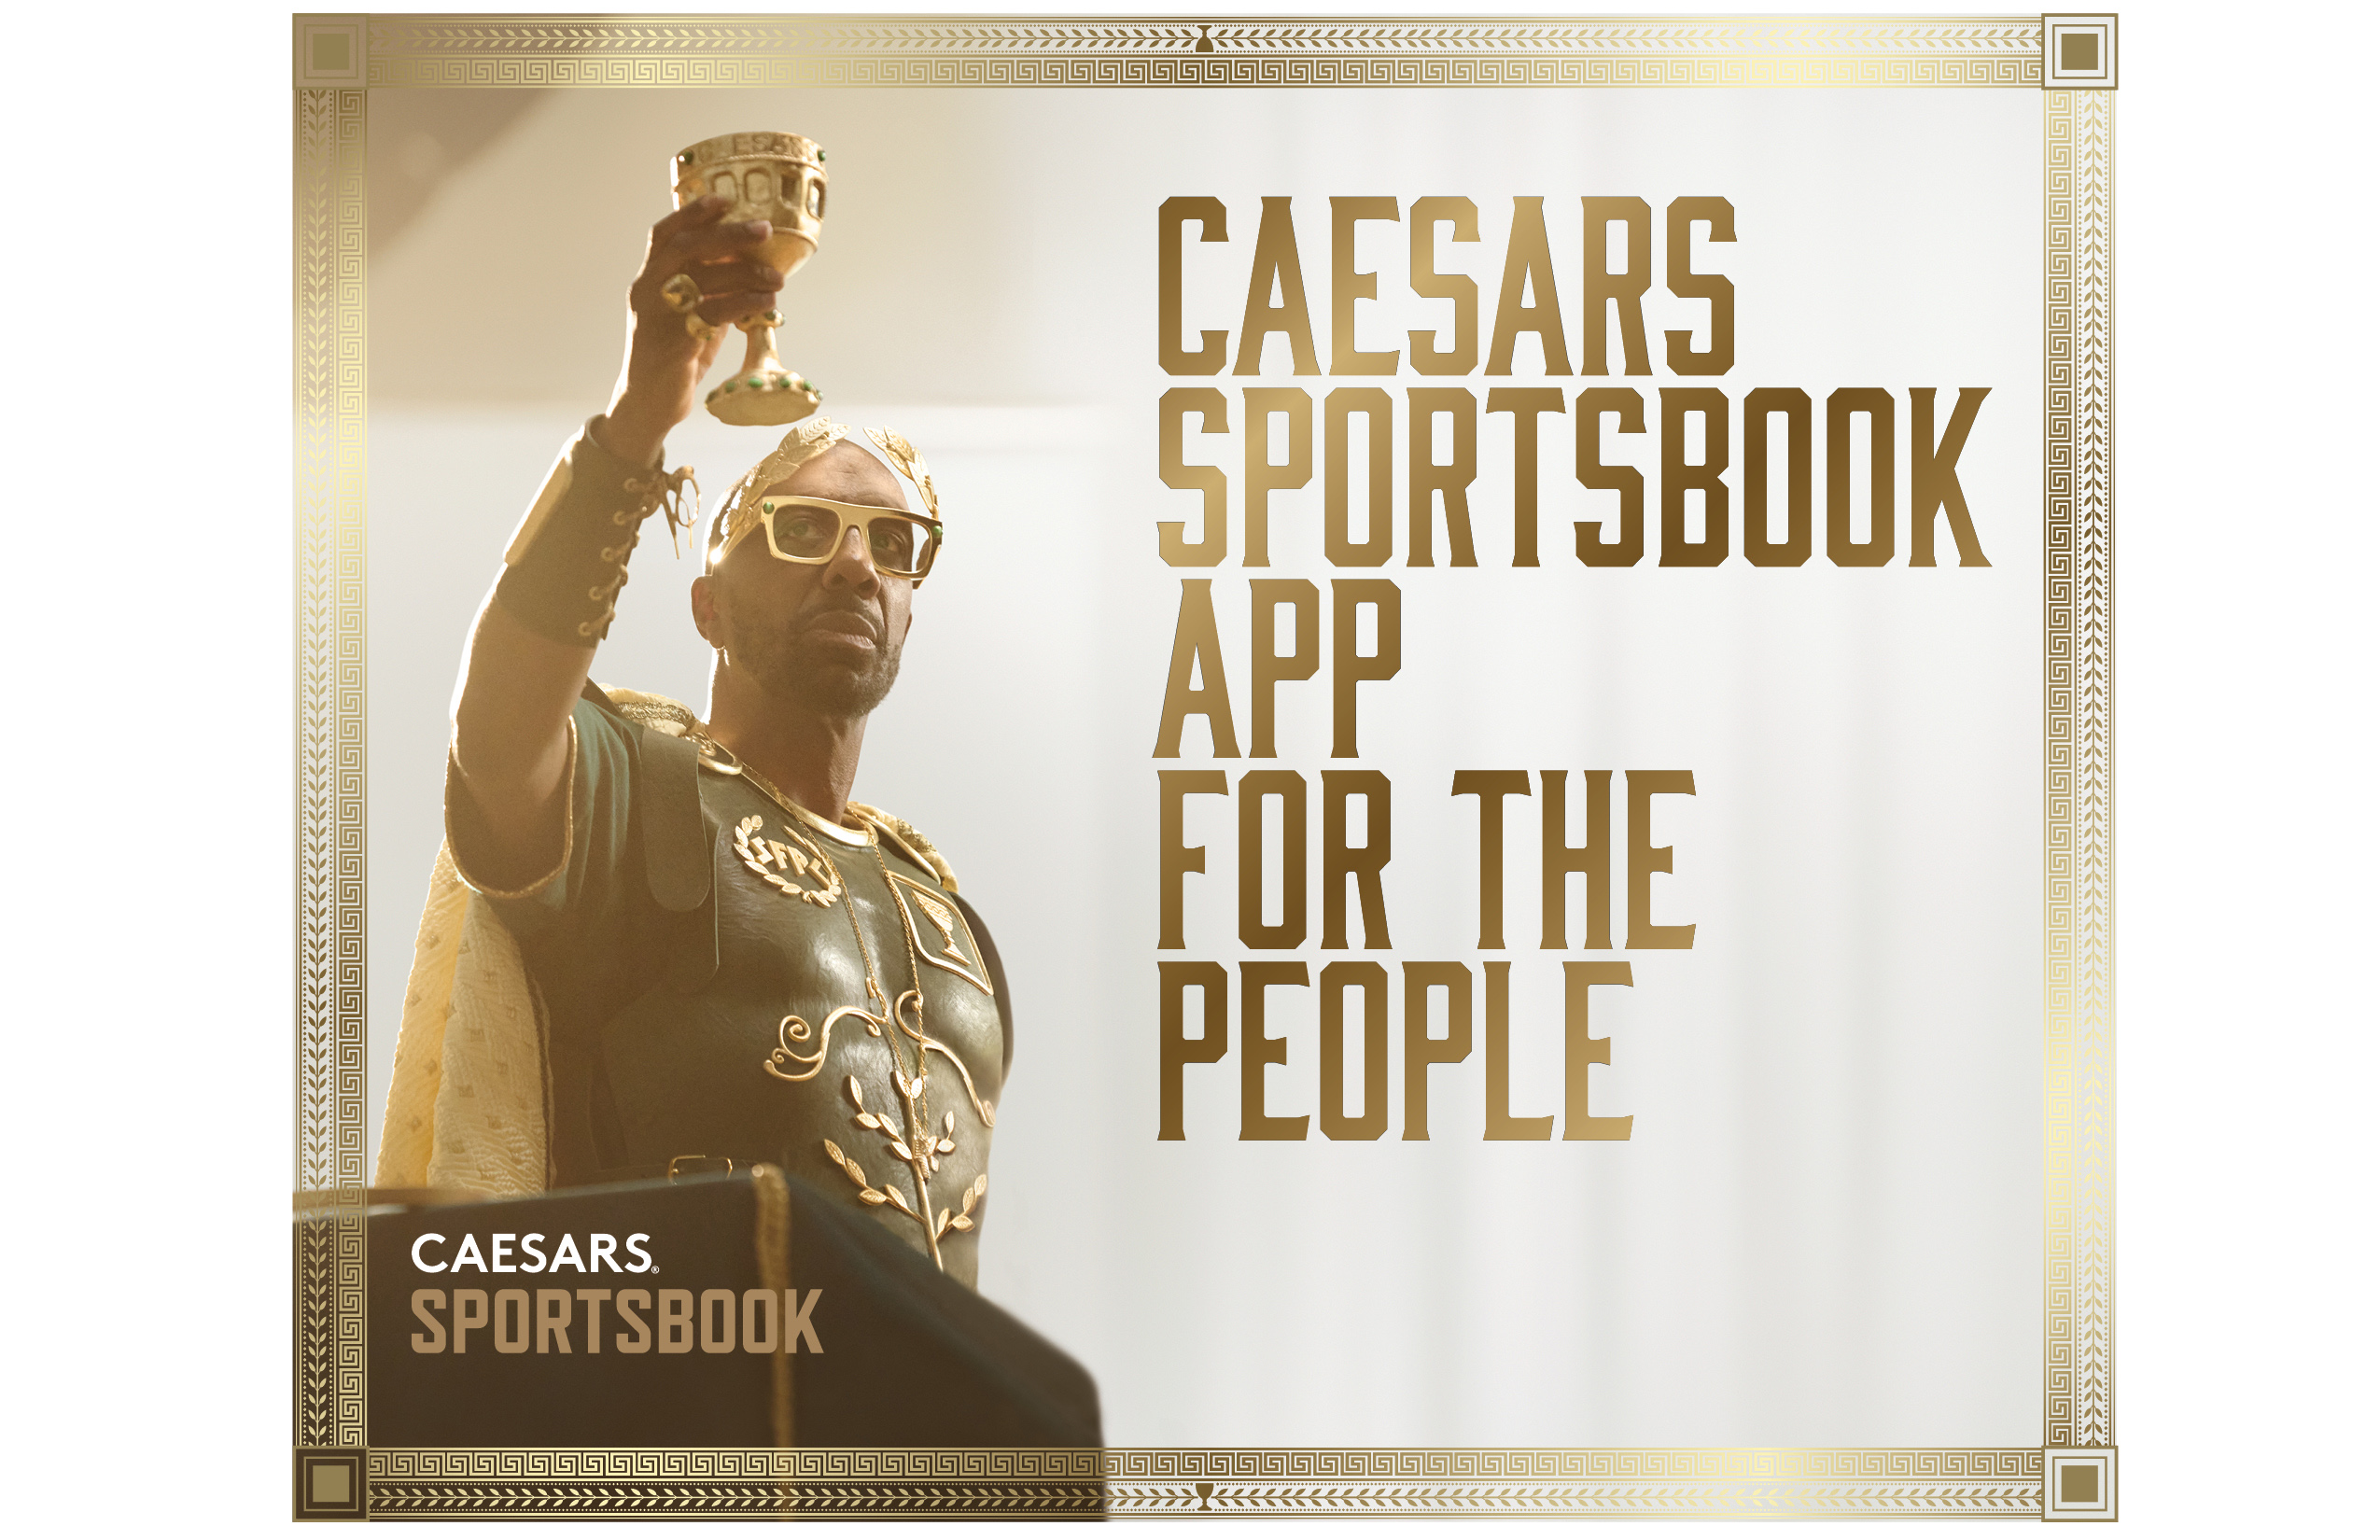 Caesars Sportsbook is the app for the people, Caesar raises his goblet.